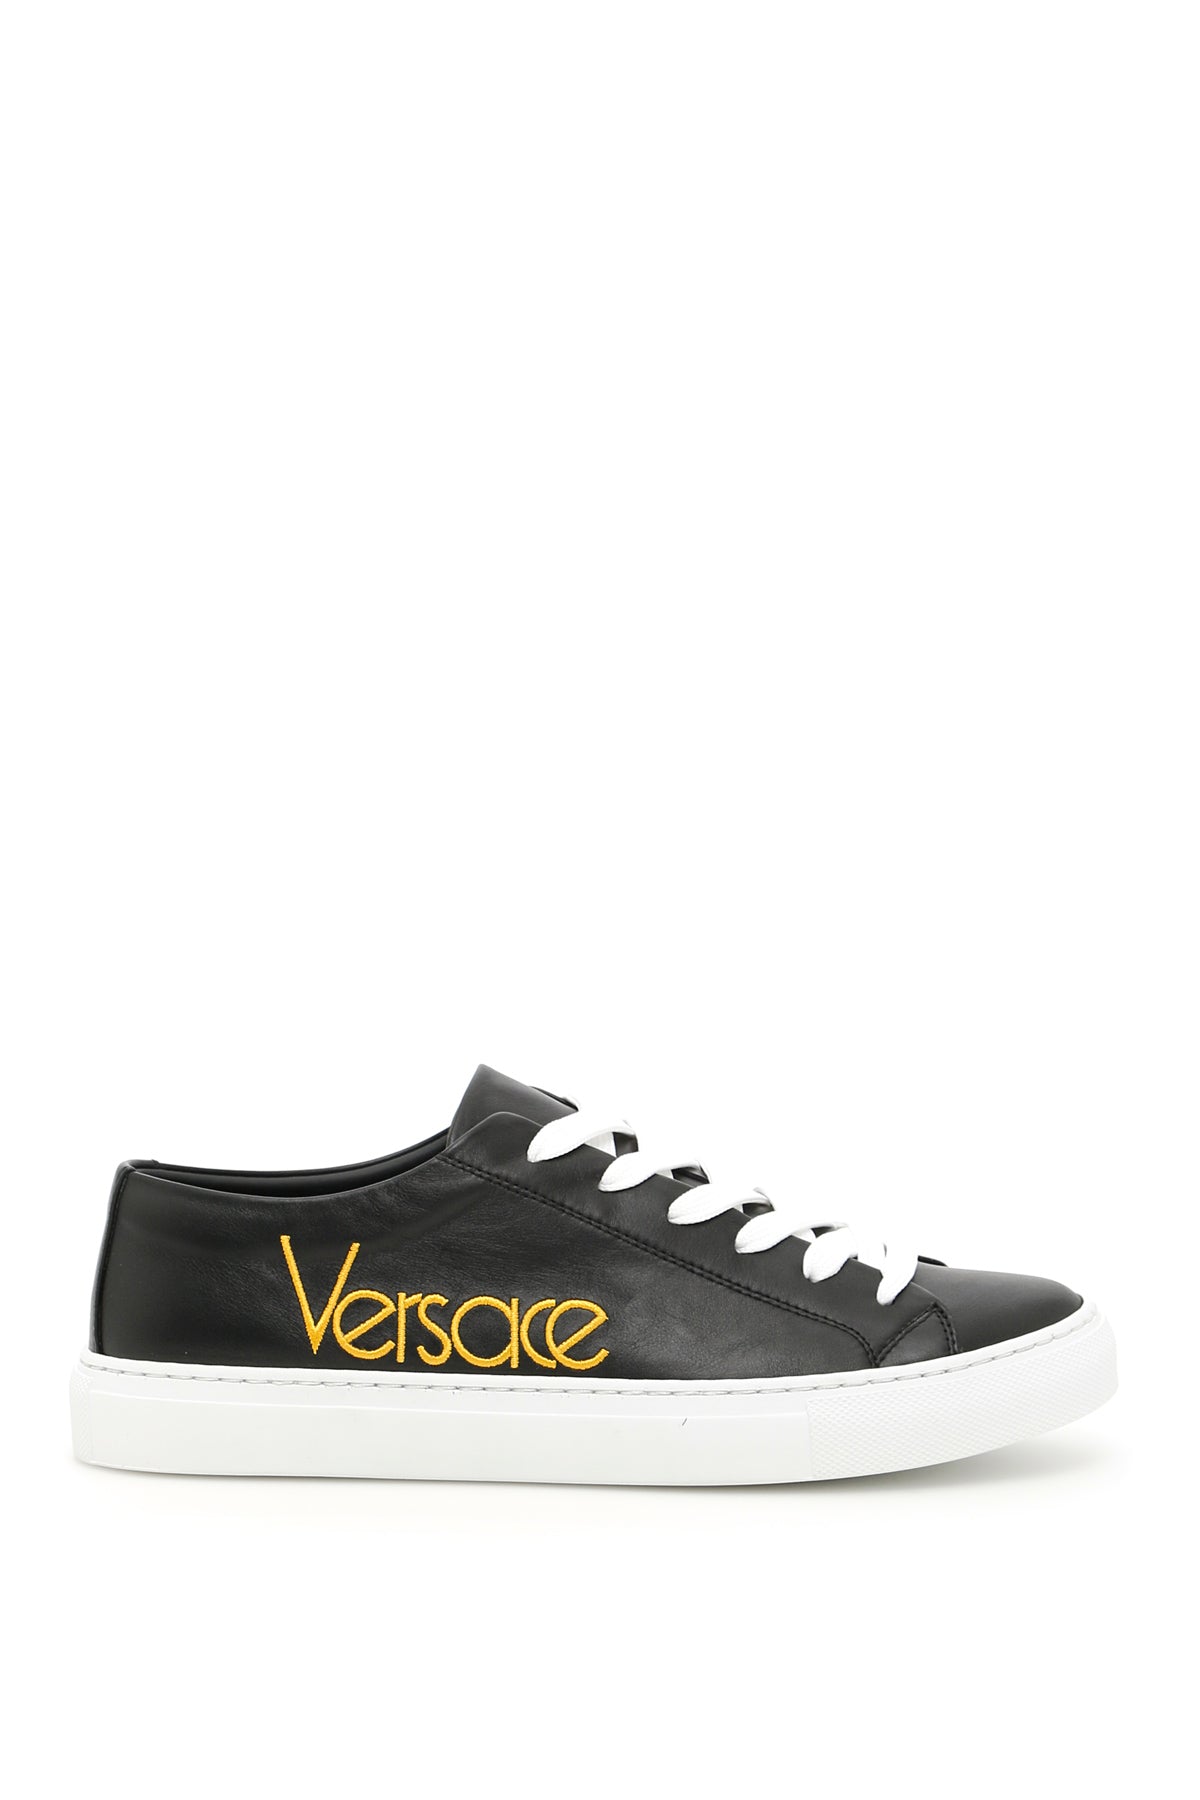 VERSACE VERSACE EMBROIDERED LOGO trainers